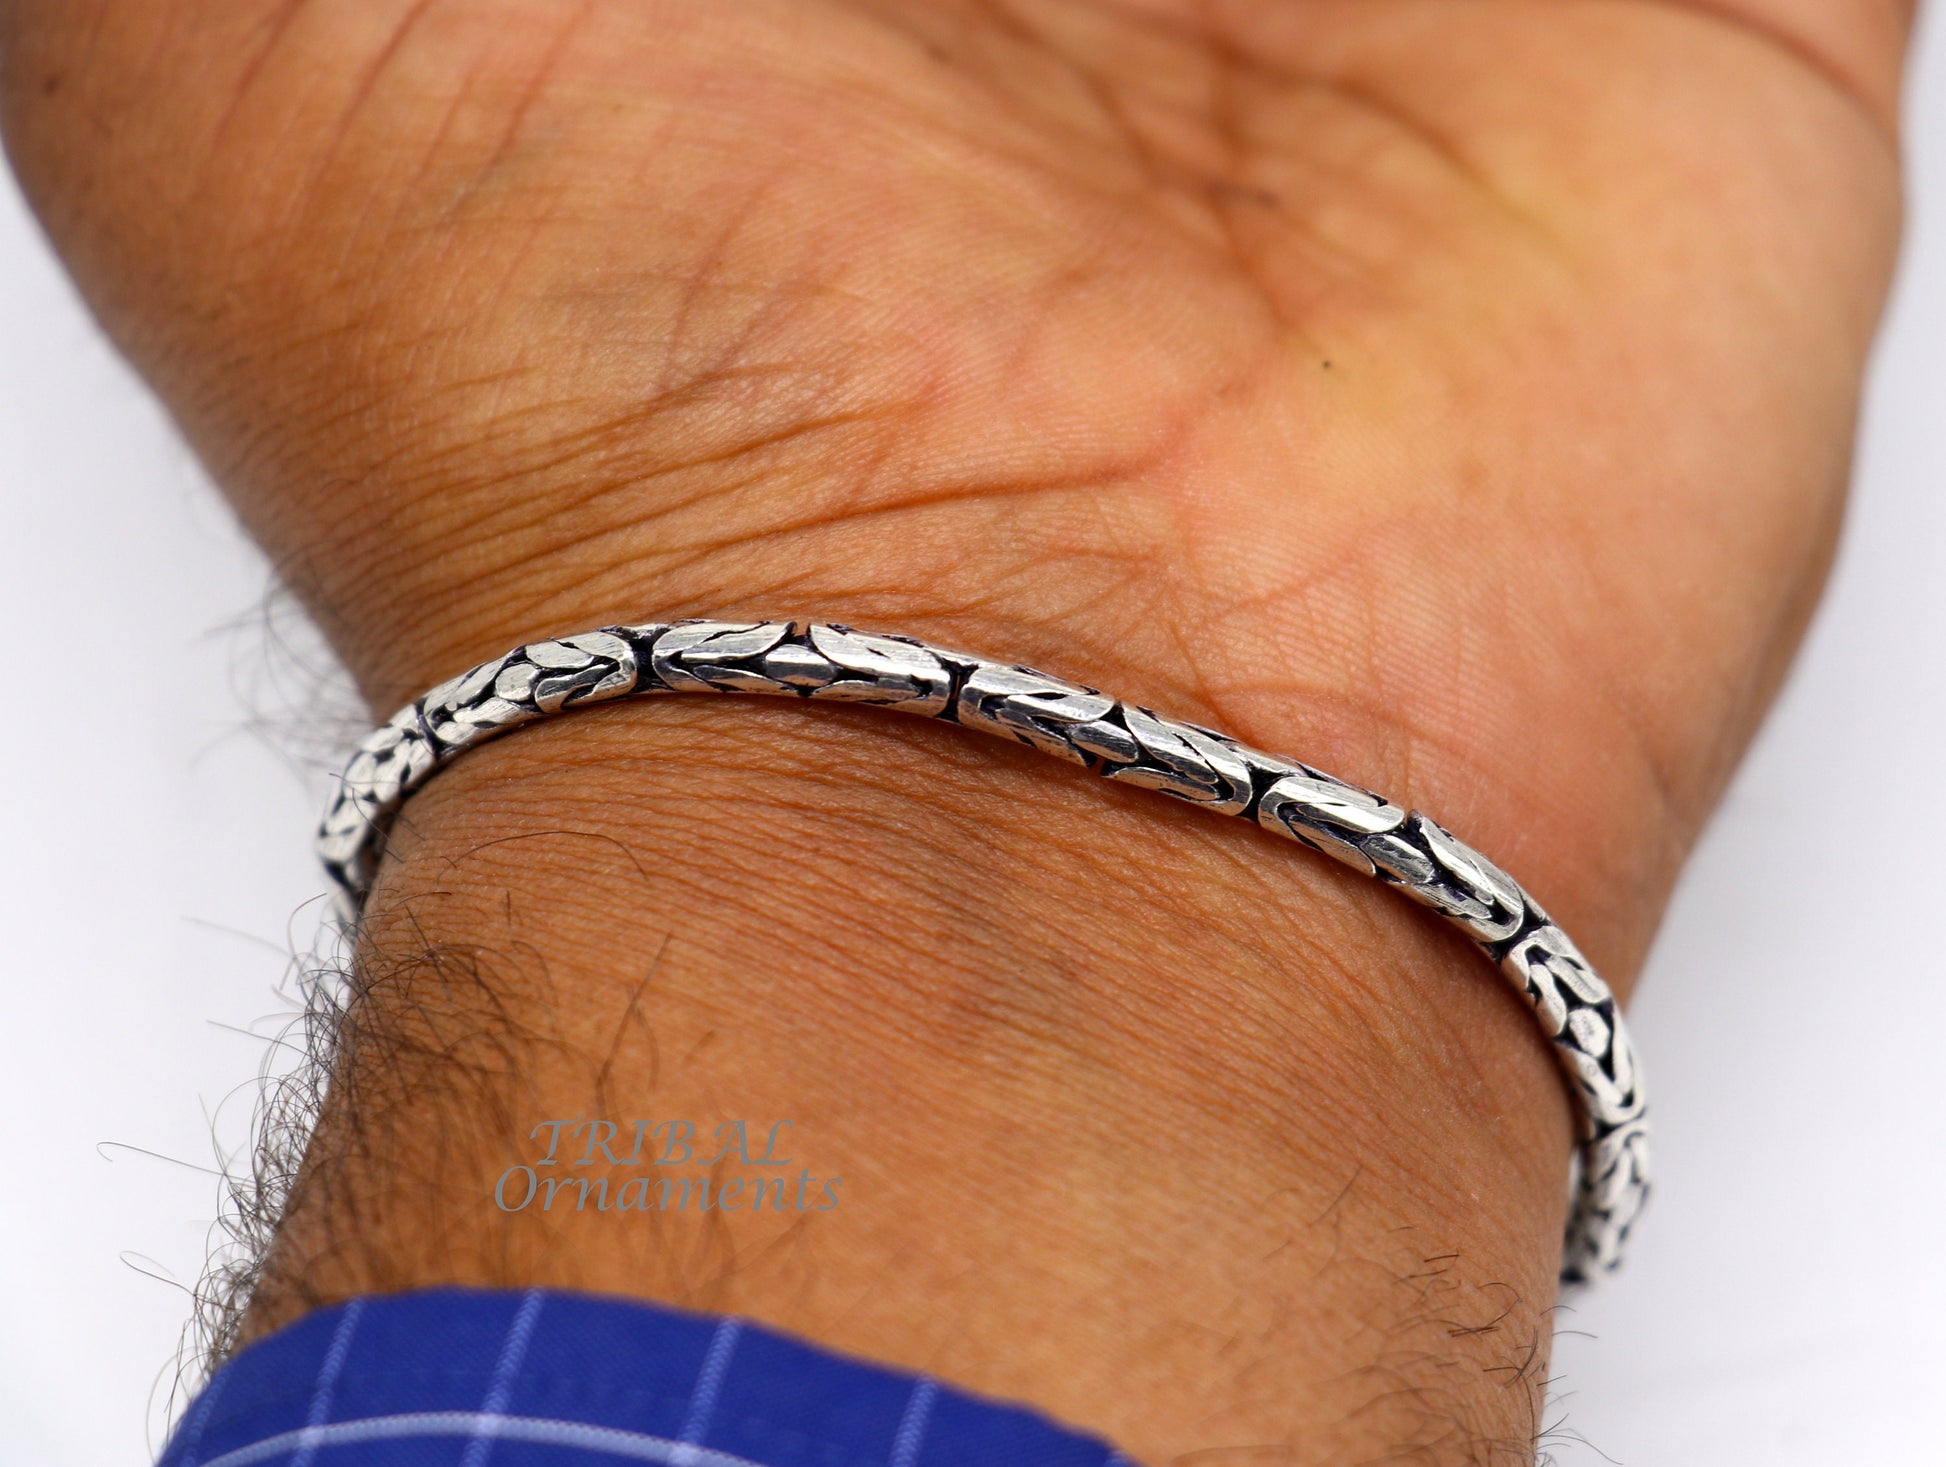 3.5mm 6.5" to 8.5" Unique byzantine design 925 Sterling silver handmade chain bracelet flexible bracelet unisex jewelry from India  sbr729 - TRIBAL ORNAMENTS